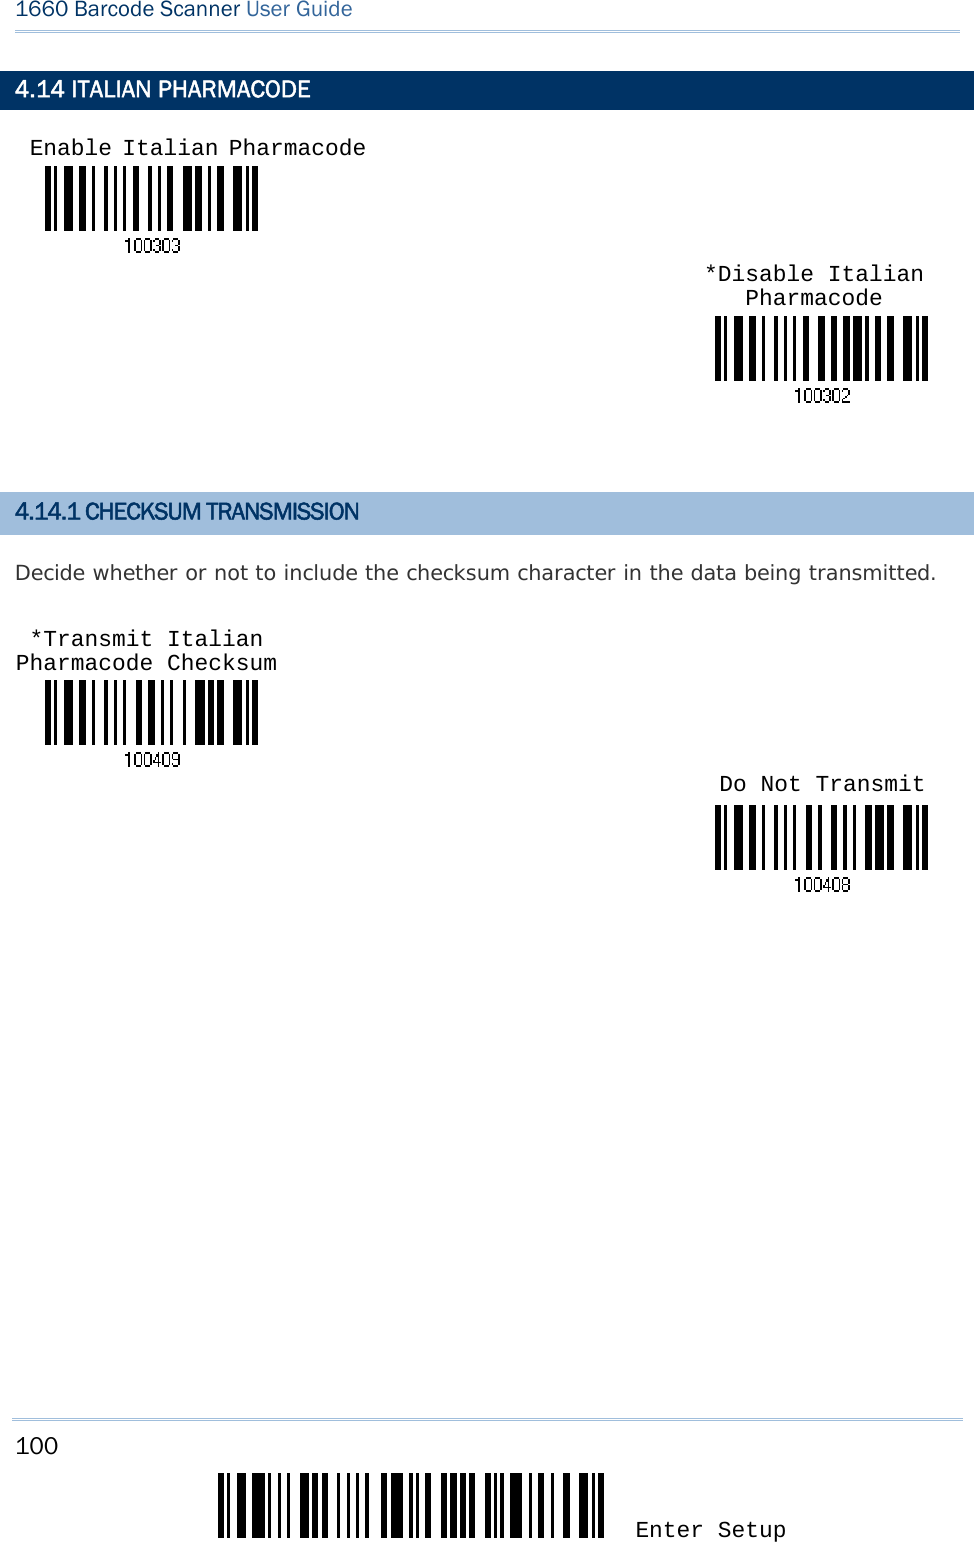 100 Enter Setup 1660 Barcode Scanner User Guide  4.14 ITALIAN PHARMACODE    4.14.1 CHECKSUM TRANSMISSION Decide whether or not to include the checksum character in the data being transmitted.         Enable Italian Pharmacode *Disable Italian Pharmacode *Transmit Italian Pharmacode Checksum Do Not Transmit